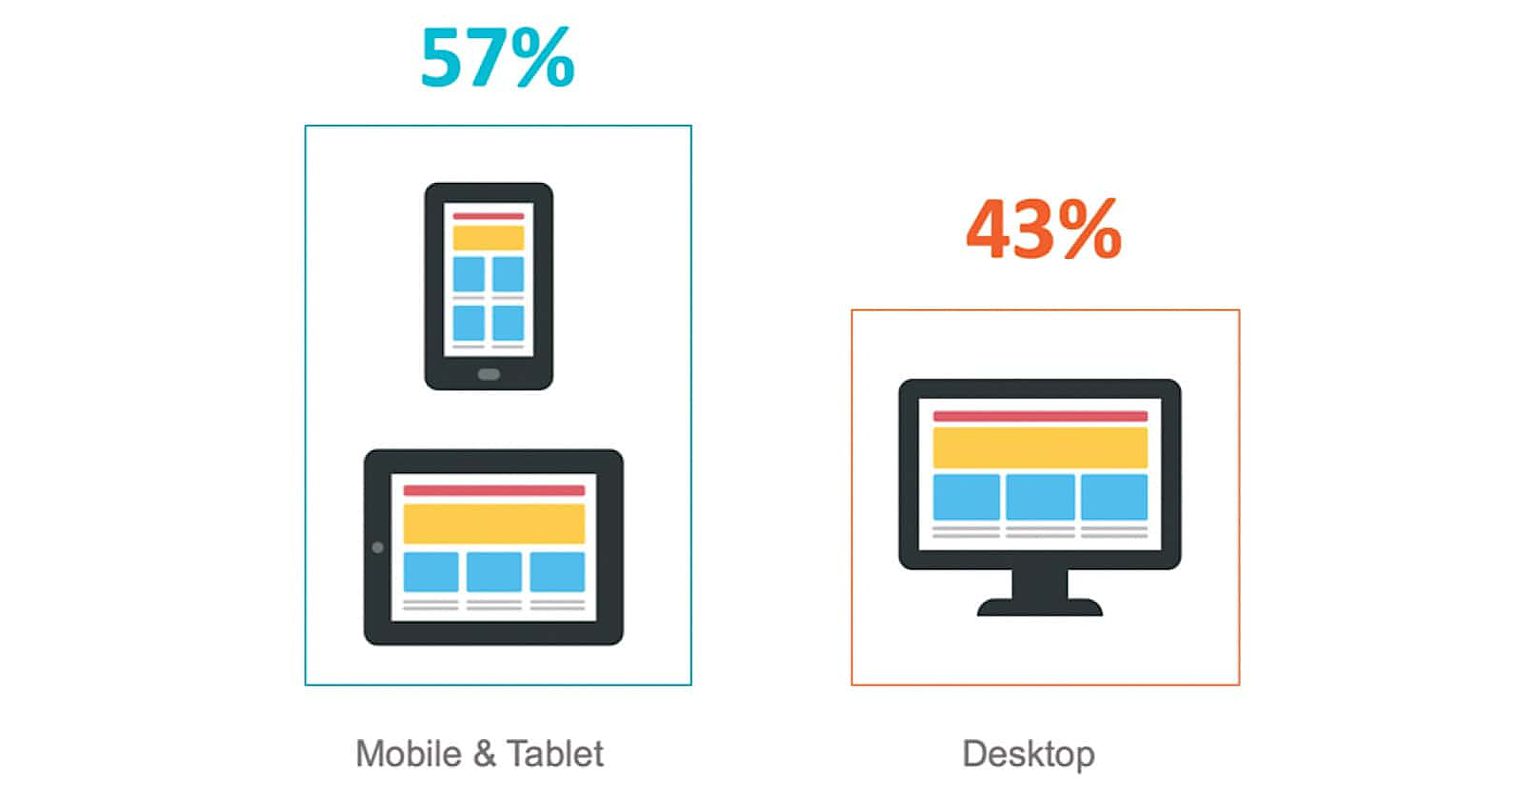 57% of Search Traffic is Now Mobile, According to Recent Study